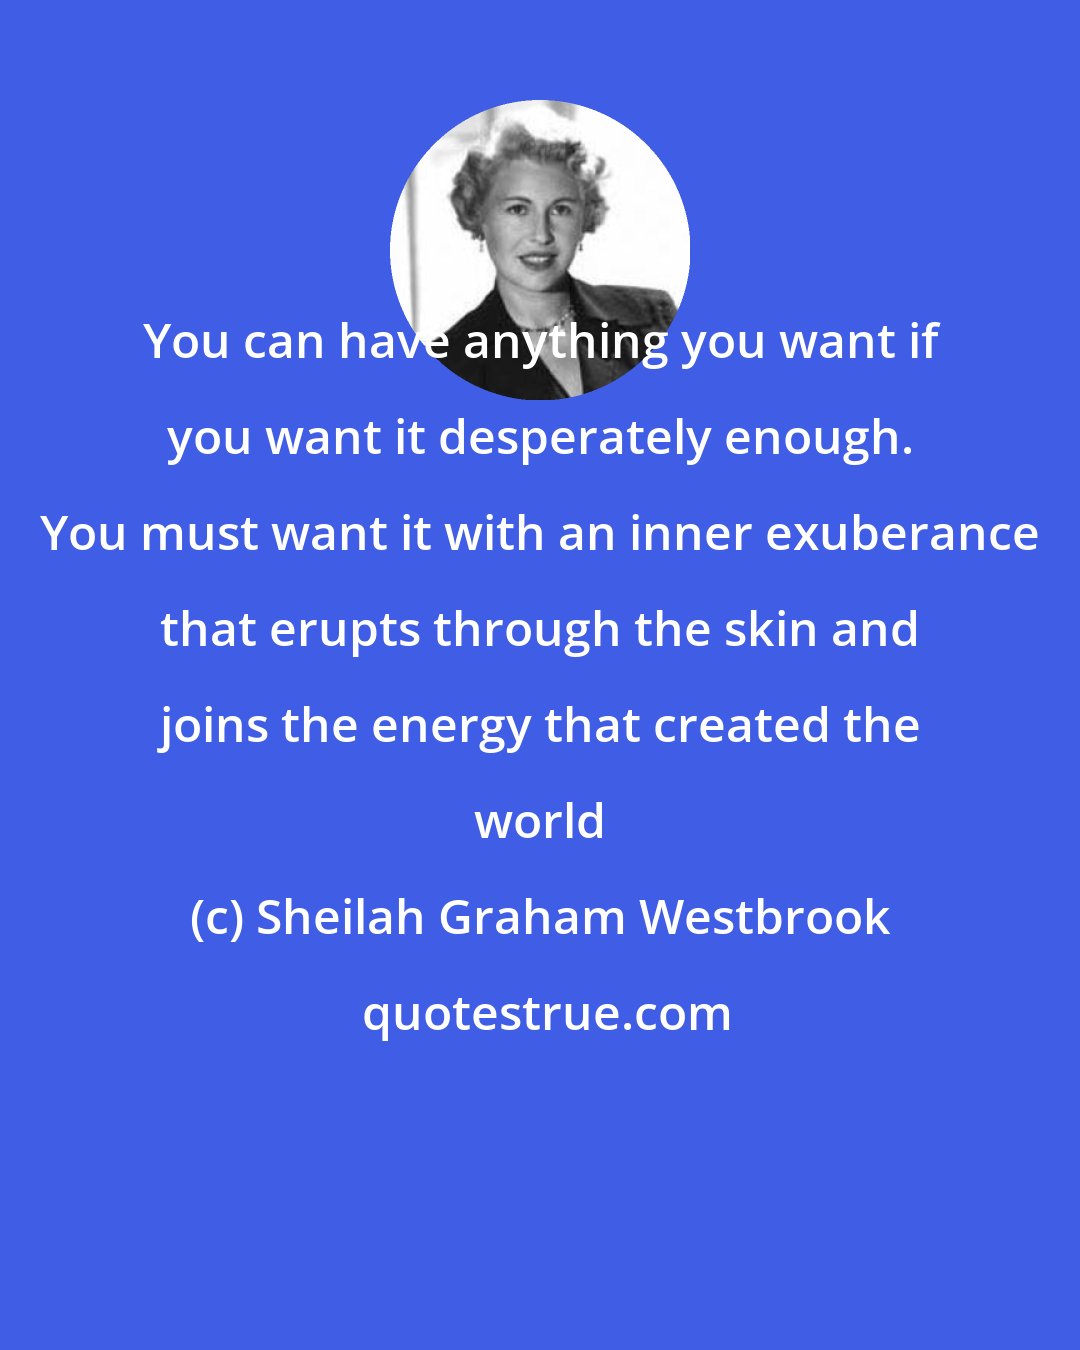 Sheilah Graham Westbrook: You can have anything you want if you want it desperately enough. You must want it with an inner exuberance that erupts through the skin and joins the energy that created the world